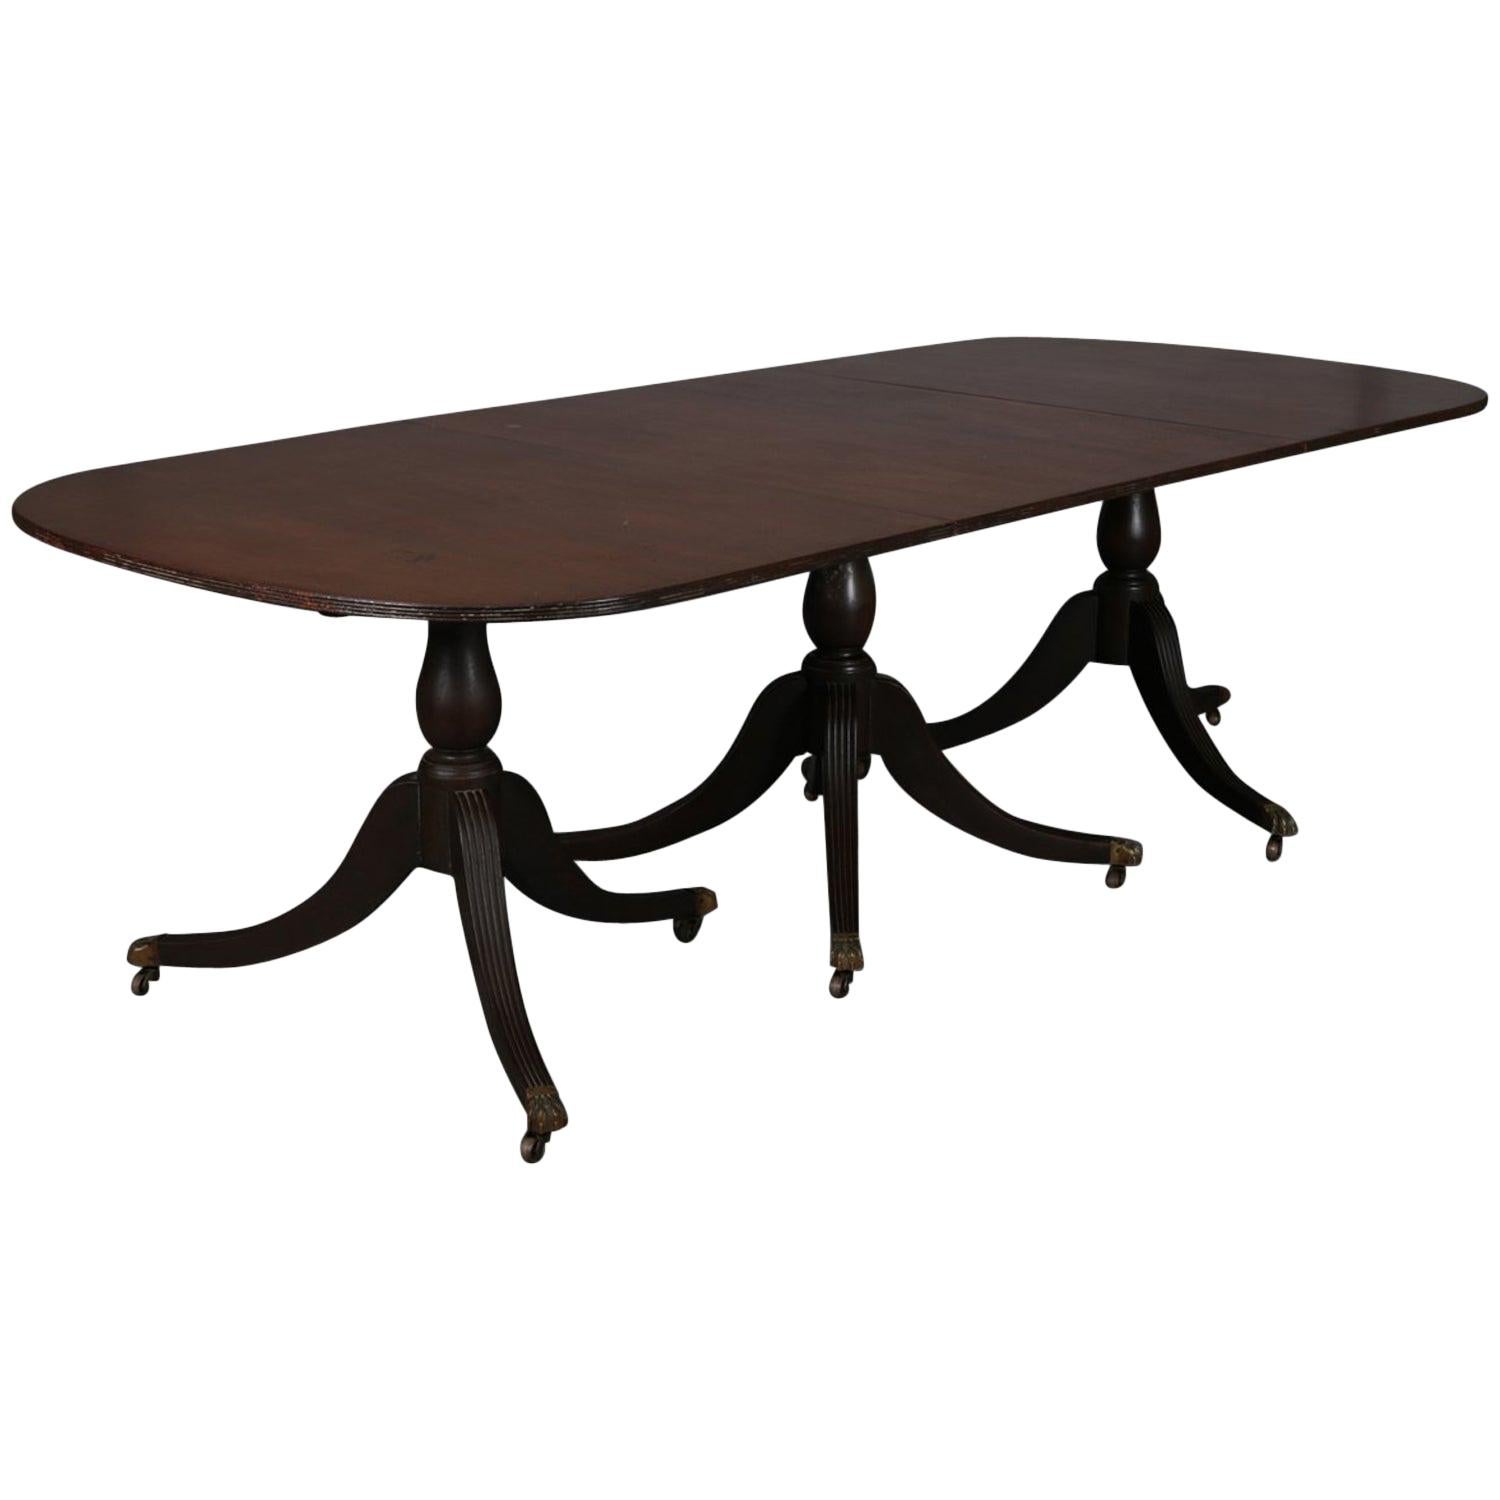 Antique Federal Triple Pedestal Mahogany Banquet Table with 2 Leaves, circa 1890